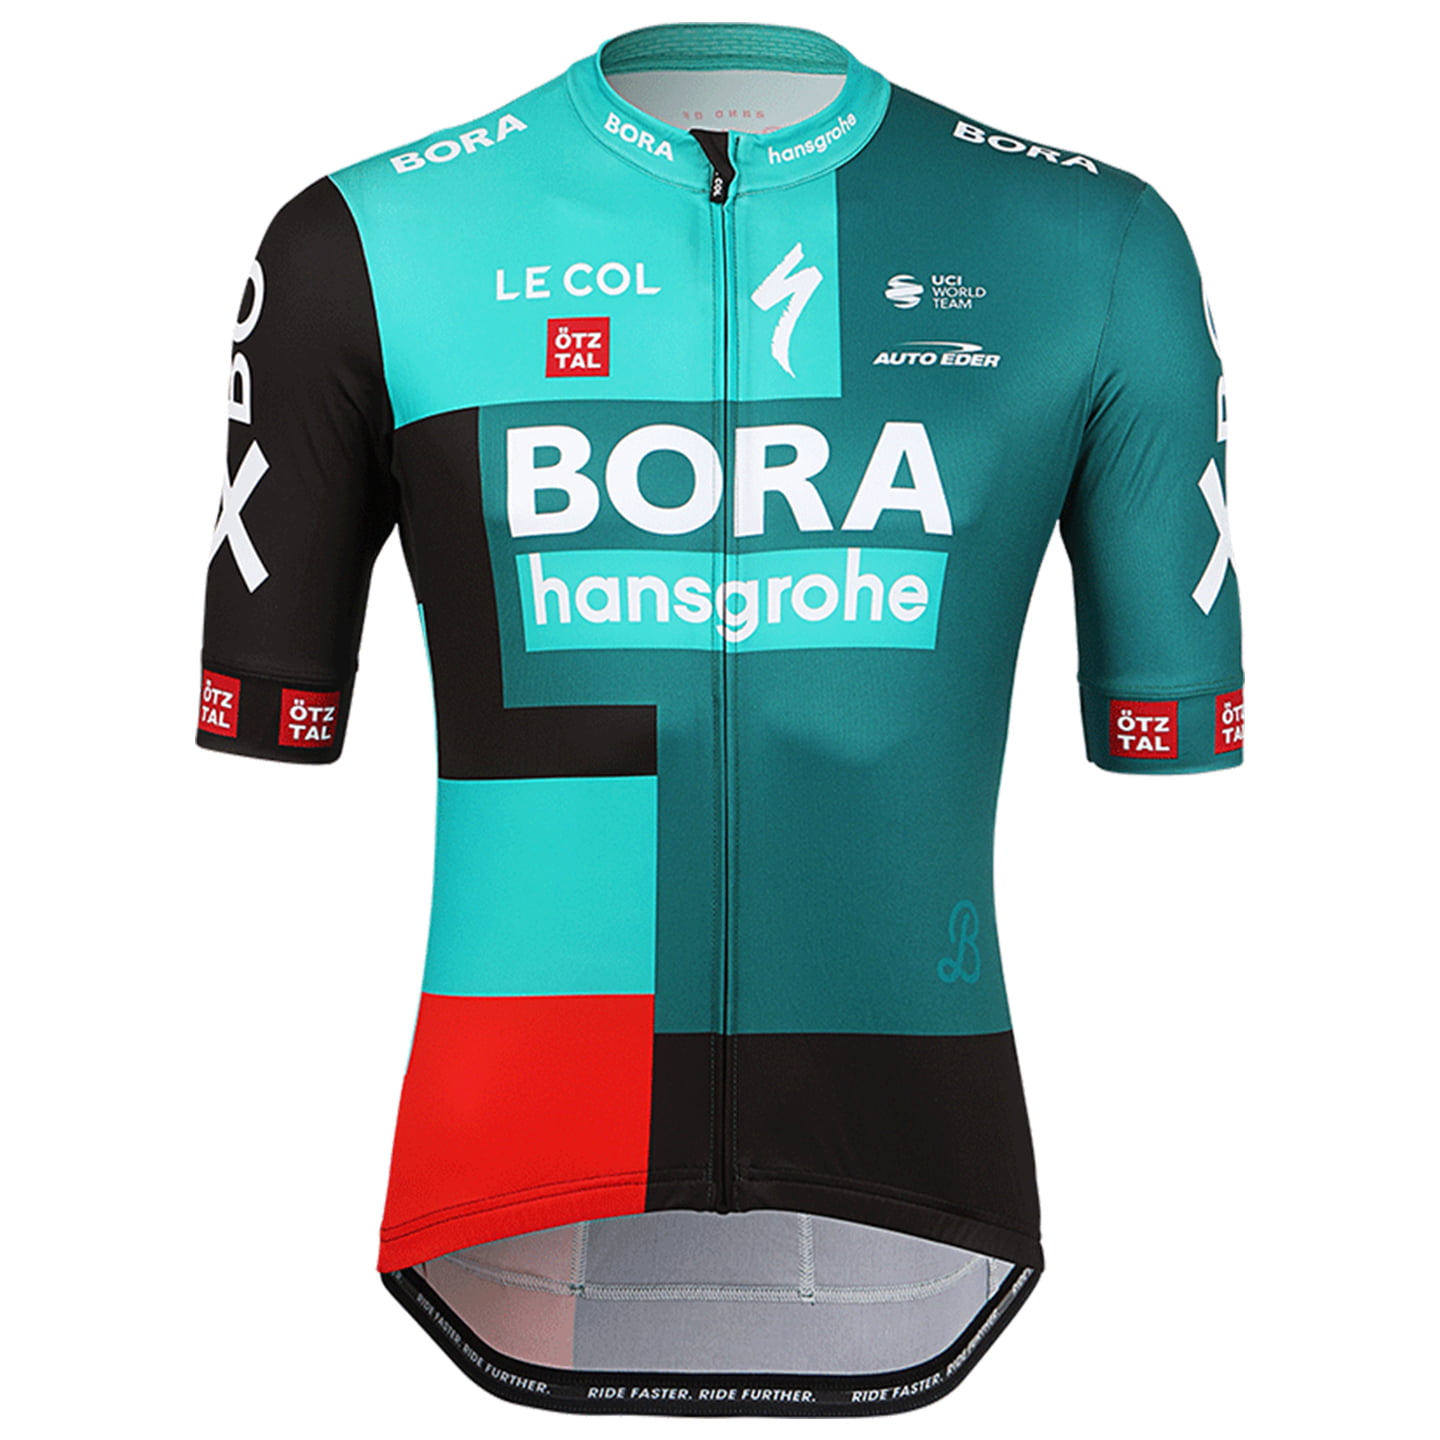 BORA-hansgrohe 2022 Short Sleeve Jersey, for men, size S, Cycling jersey, Cycling clothing